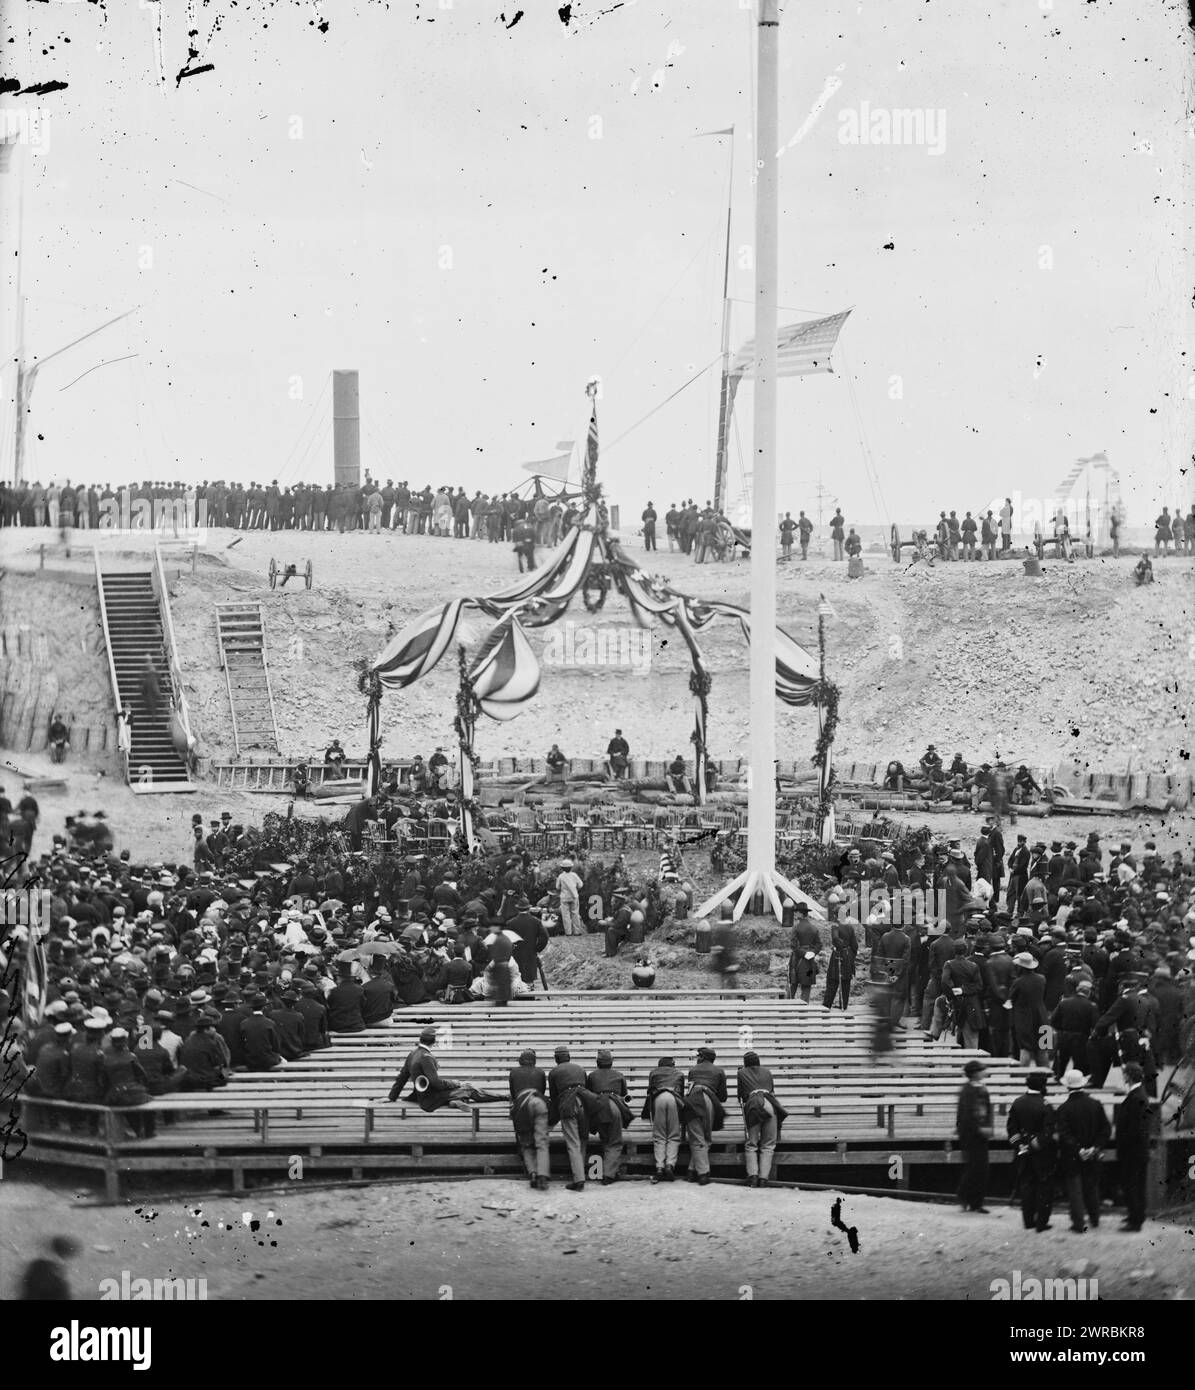 Charleston, South Carolina. Flag-raising ceremony at Fort Sumter. Arrival of Gen. Robert Anderson and guests, 1865 Apr. 14., United States, History, Civil War, 1861-1865, Glass negatives, 1860-1870., Stereographs, 1860-1870, Glass negatives, 1860-1870, 1 negative (2 plates): glass, stereograph, wet collodion Stock Photo